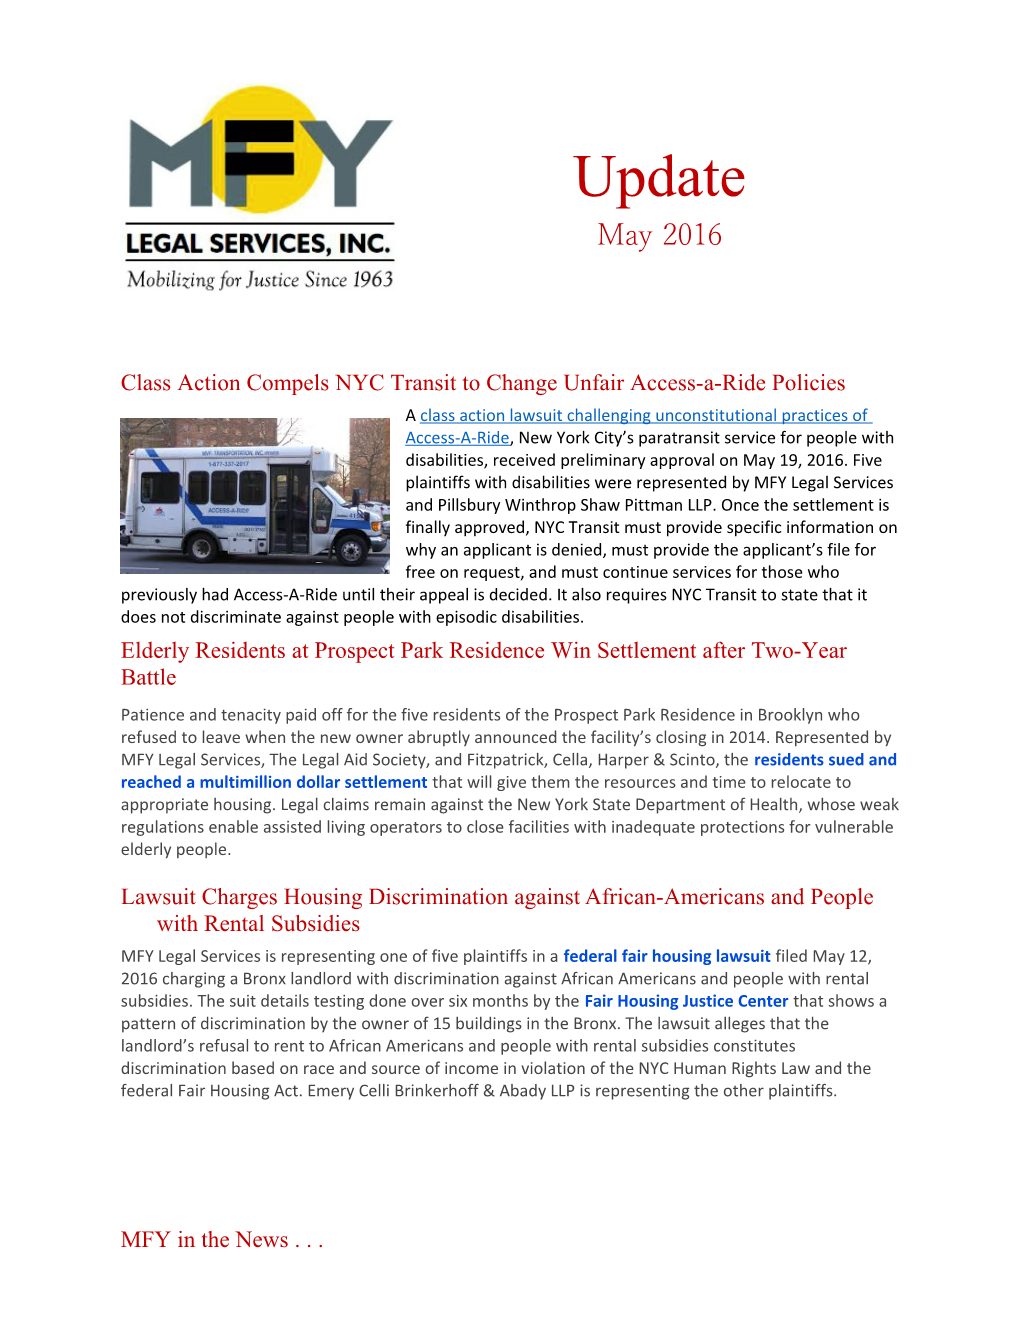 Class Action Compels NYC Transit to Change Unfair Access-A-Ride Policies